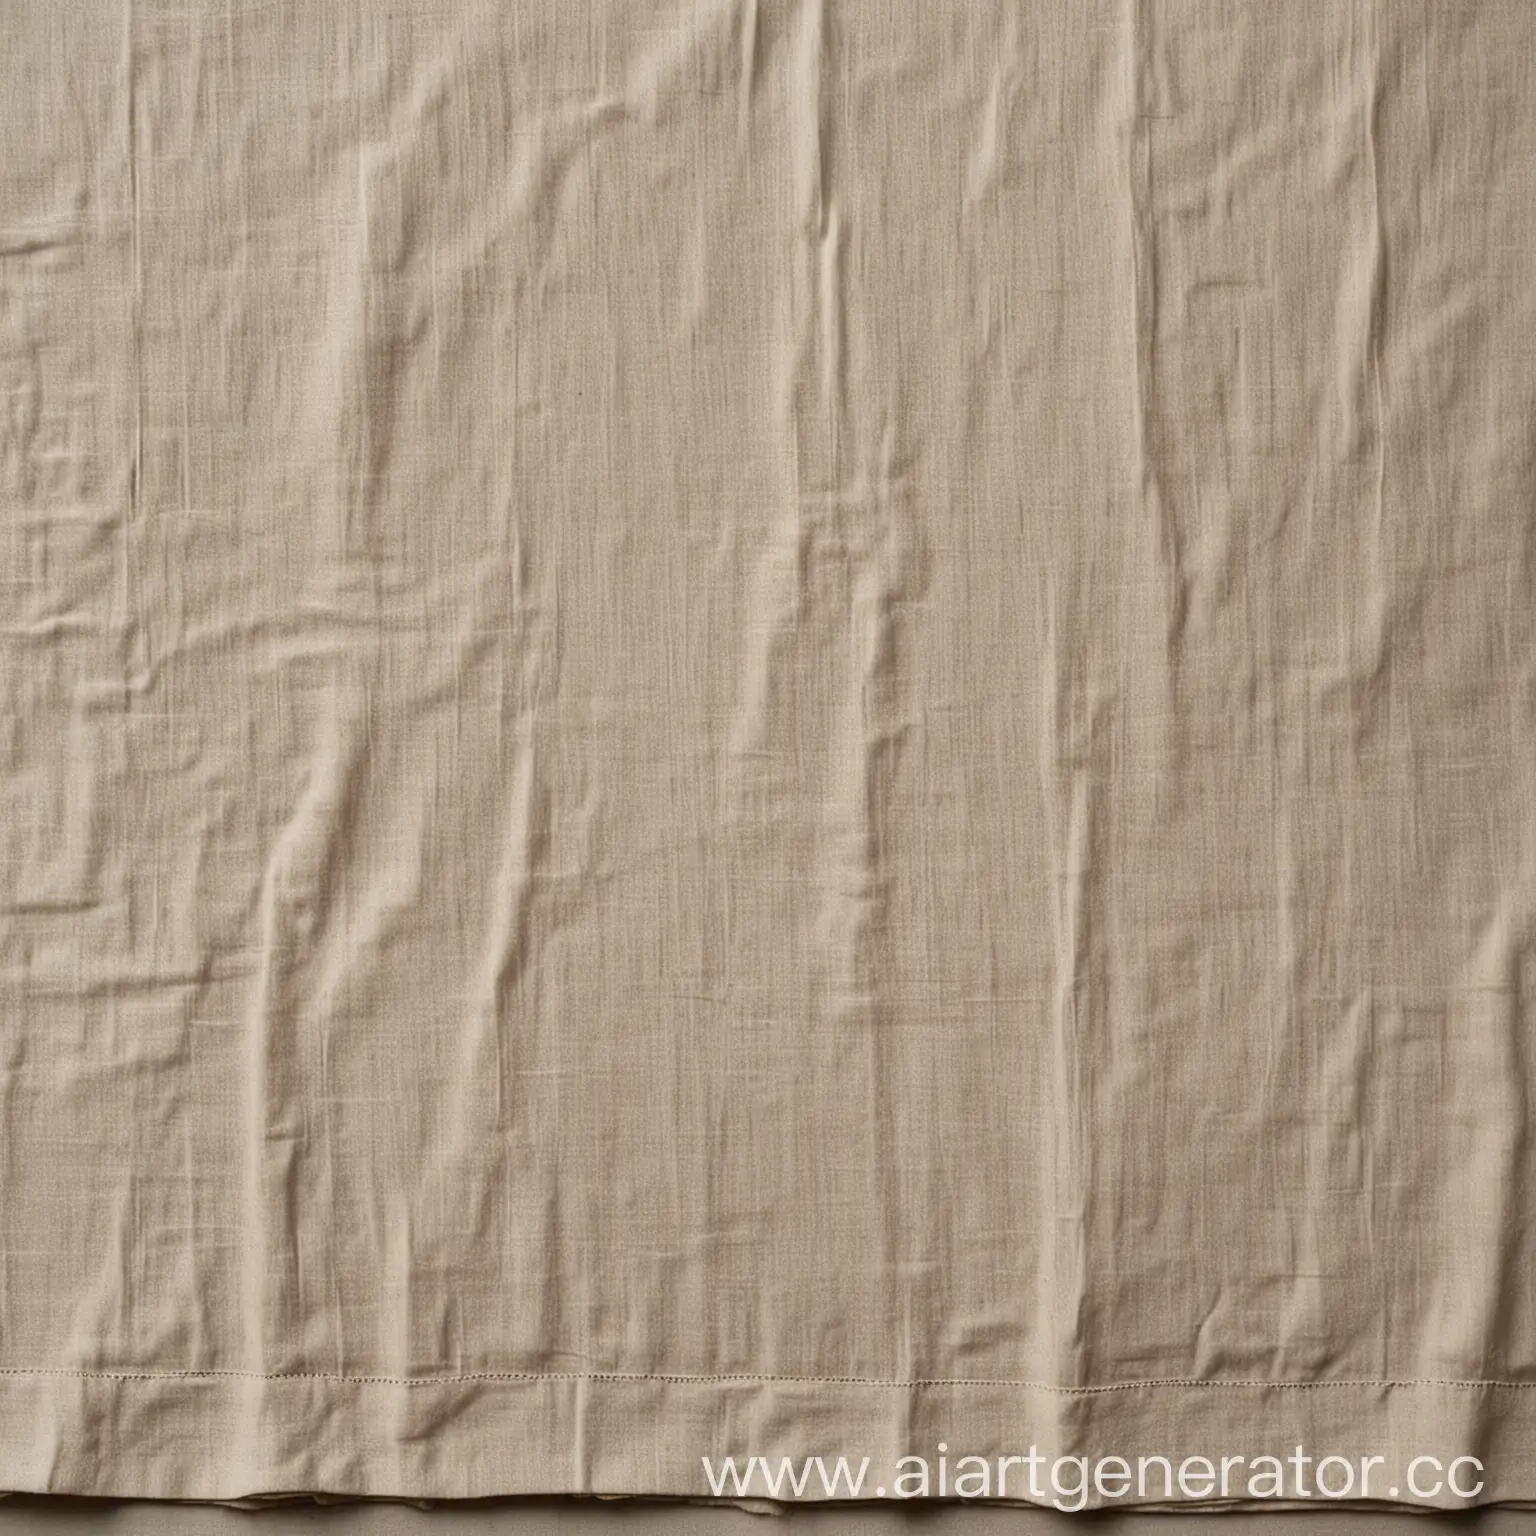 Top-View-Linen-Tablecloth-with-Subtle-Textured-Patterns